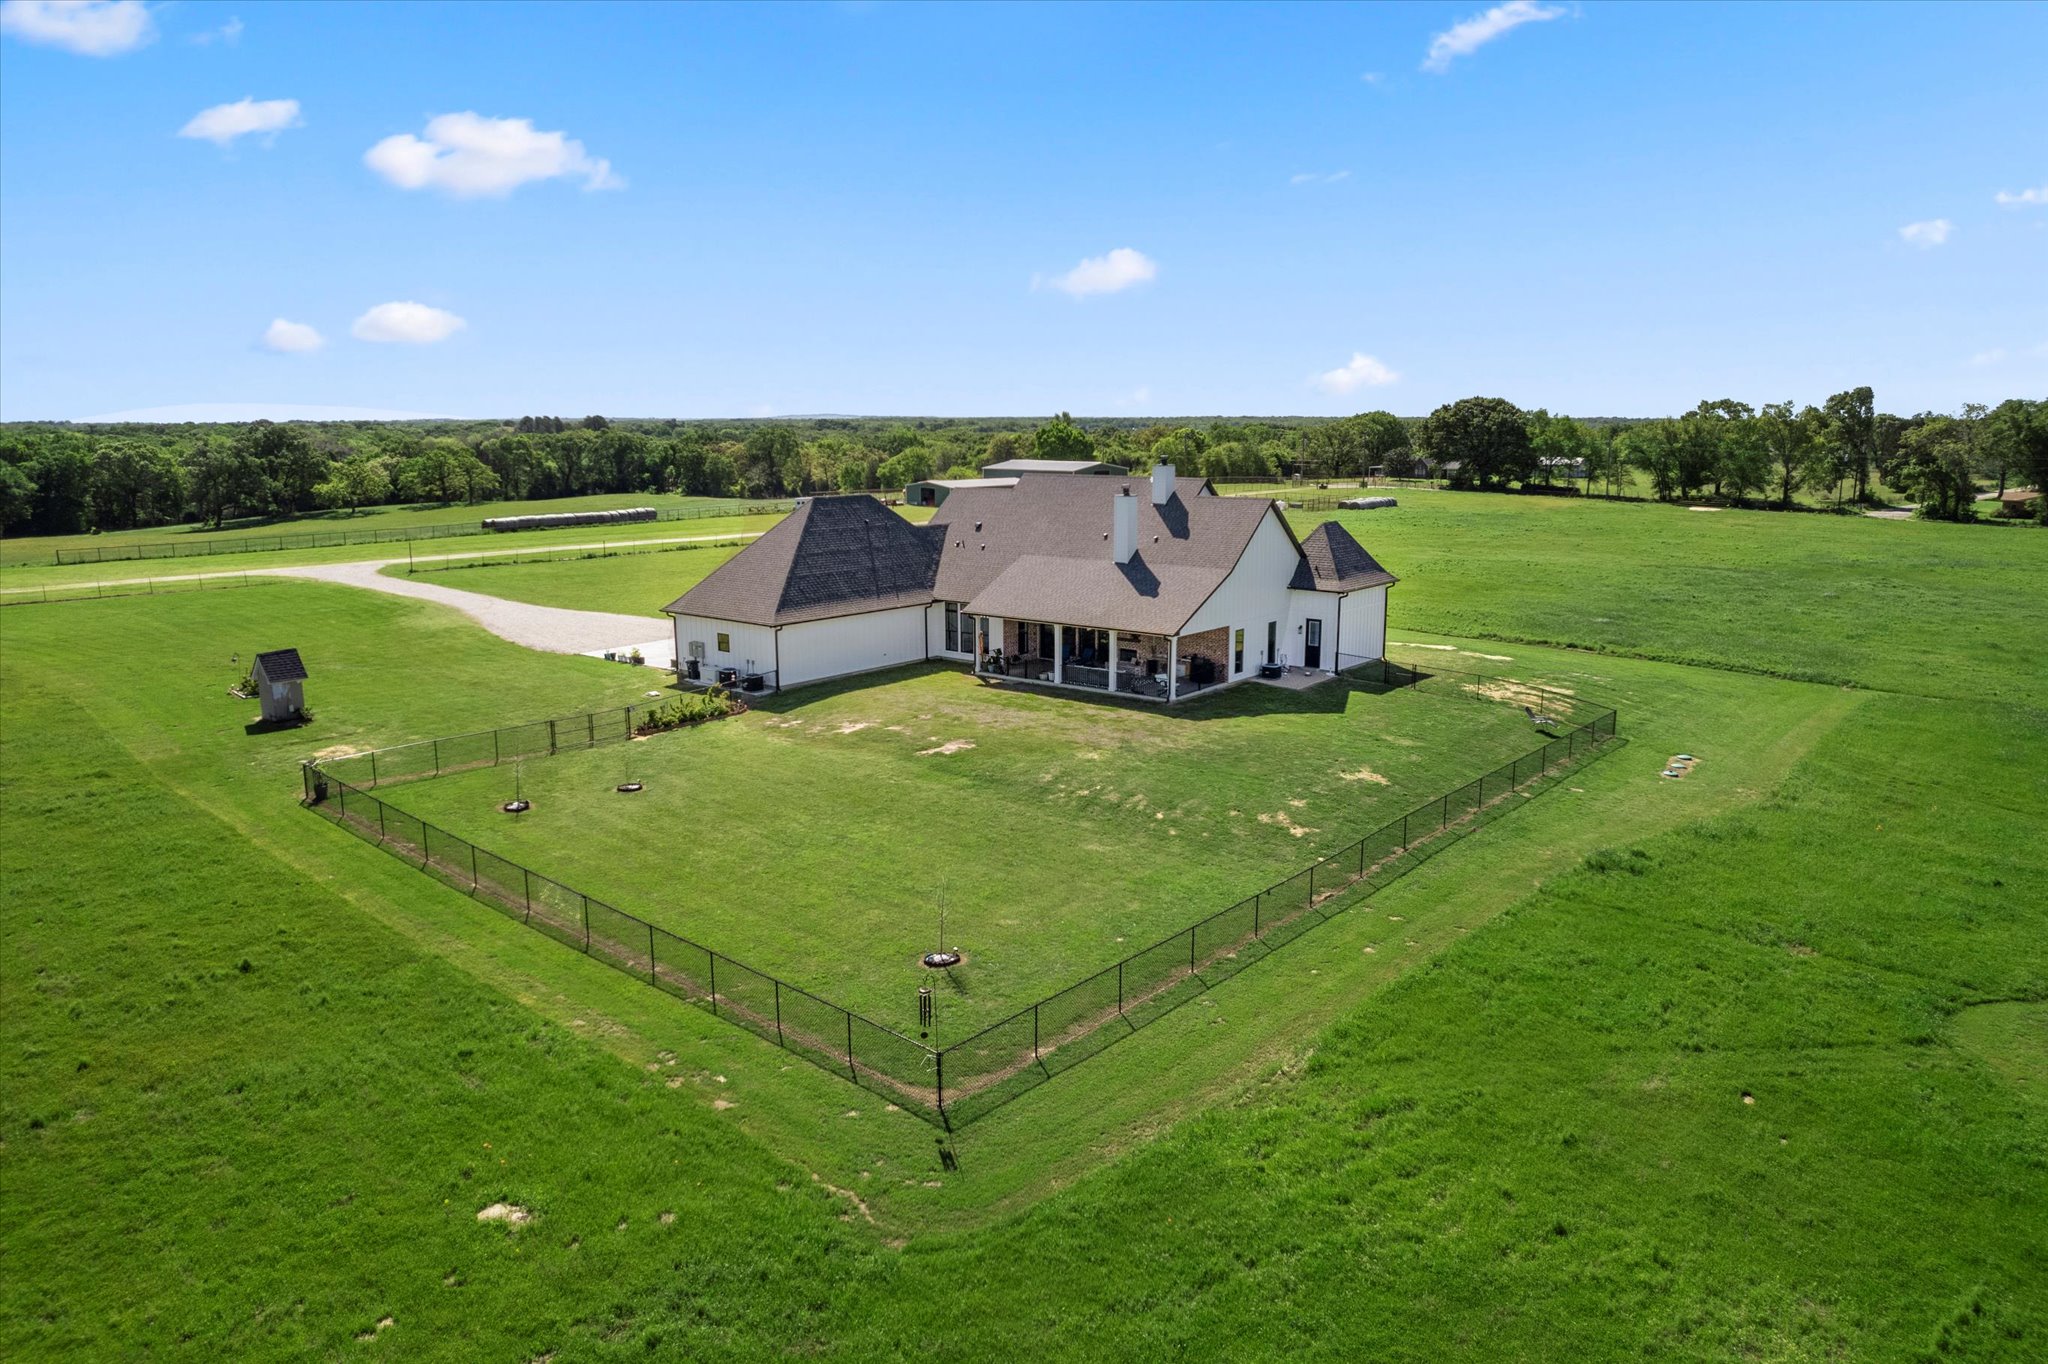 14098 County Road 2858, Eustace, Texas, 75124, United States, 5 Bedrooms Bedrooms, ,5 BathroomsBathrooms,Residential,For Sale,14098 County Road 2858,1501825